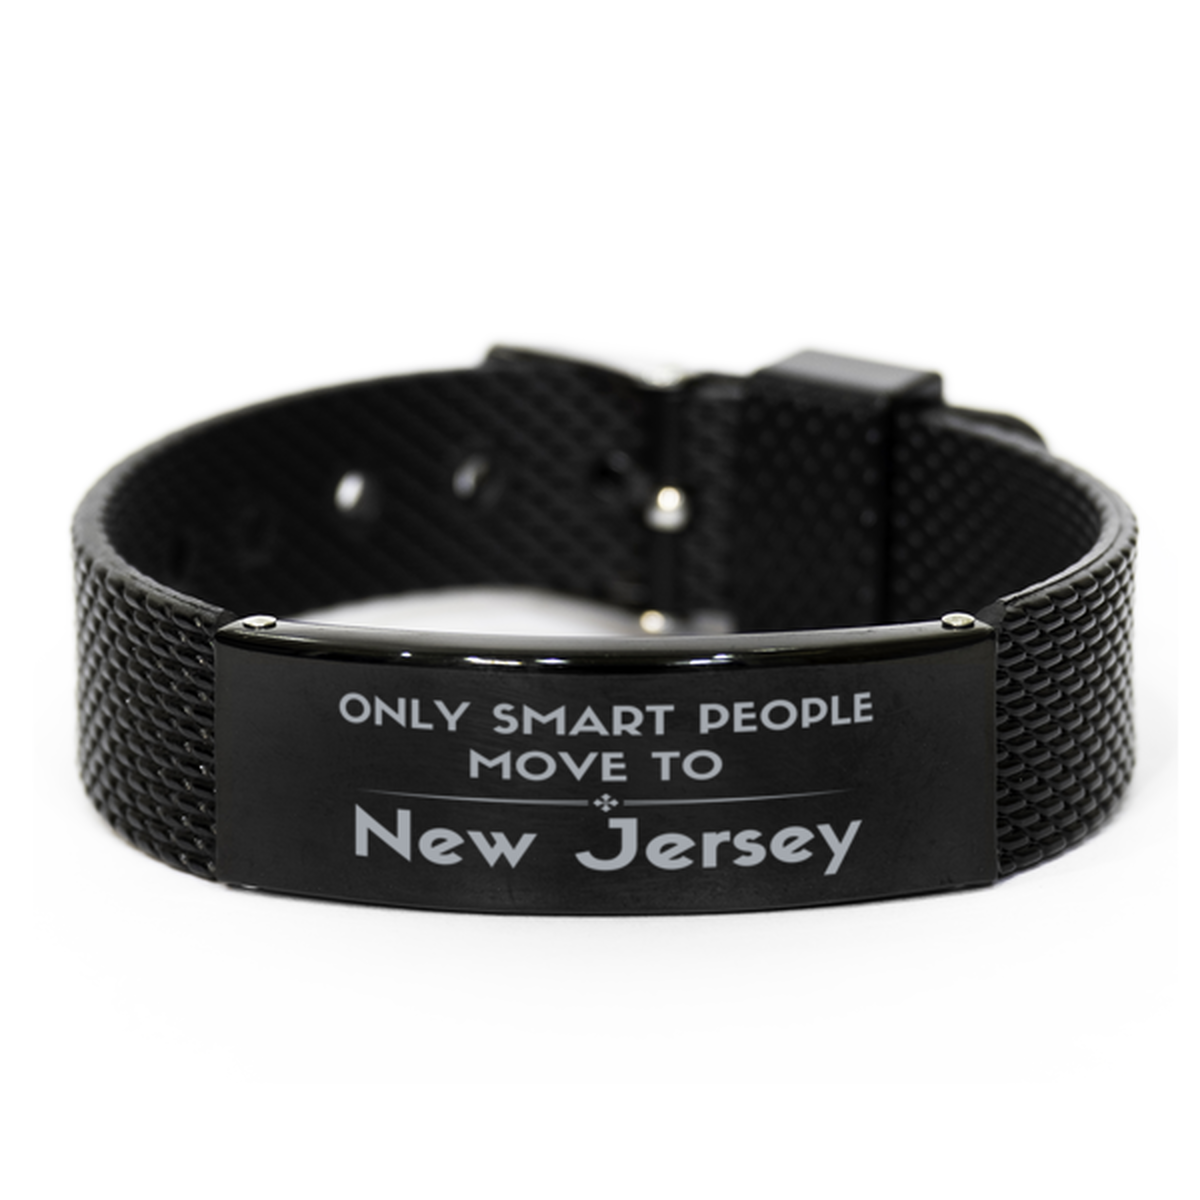 Only smart people move to New Jersey Black Shark Mesh Bracelet, Gag Gifts For New Jersey, Move to New Jersey Gifts for Friends Coworker Funny Saying Quote